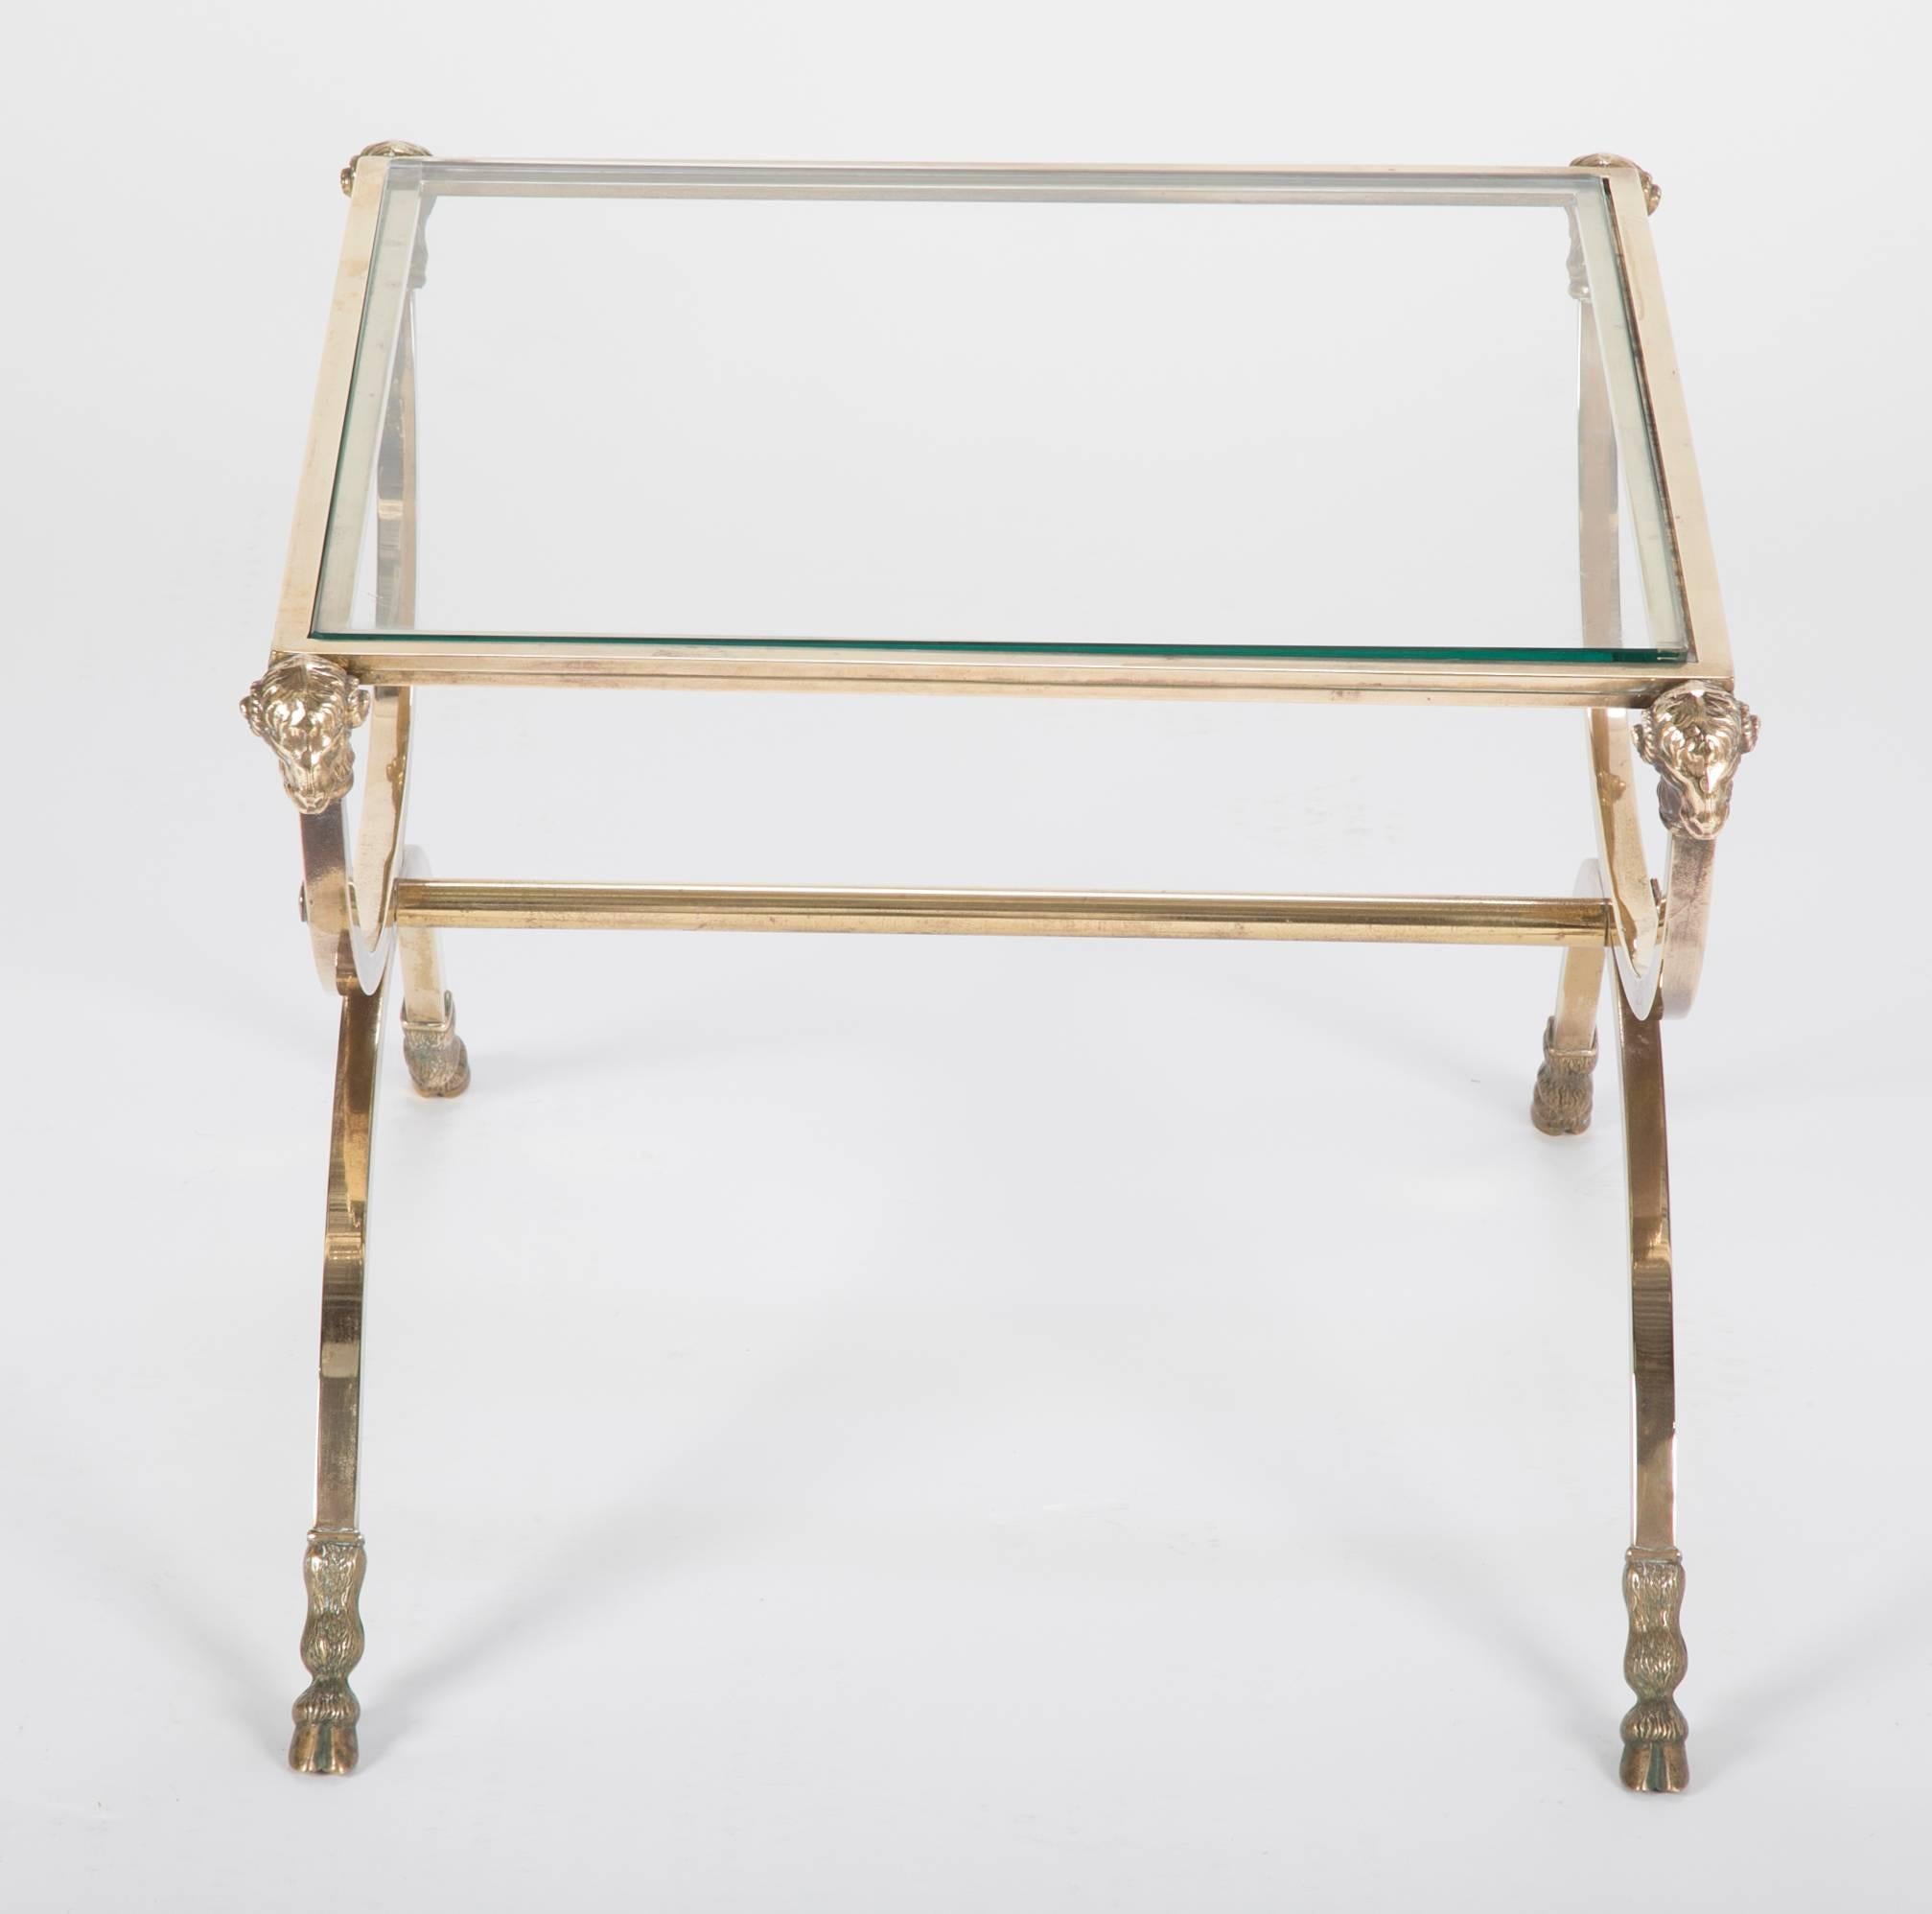 Italian Mid-Century Glass Topped Bronze Side Table with Rams Heads and Hoof Feet For Sale 5